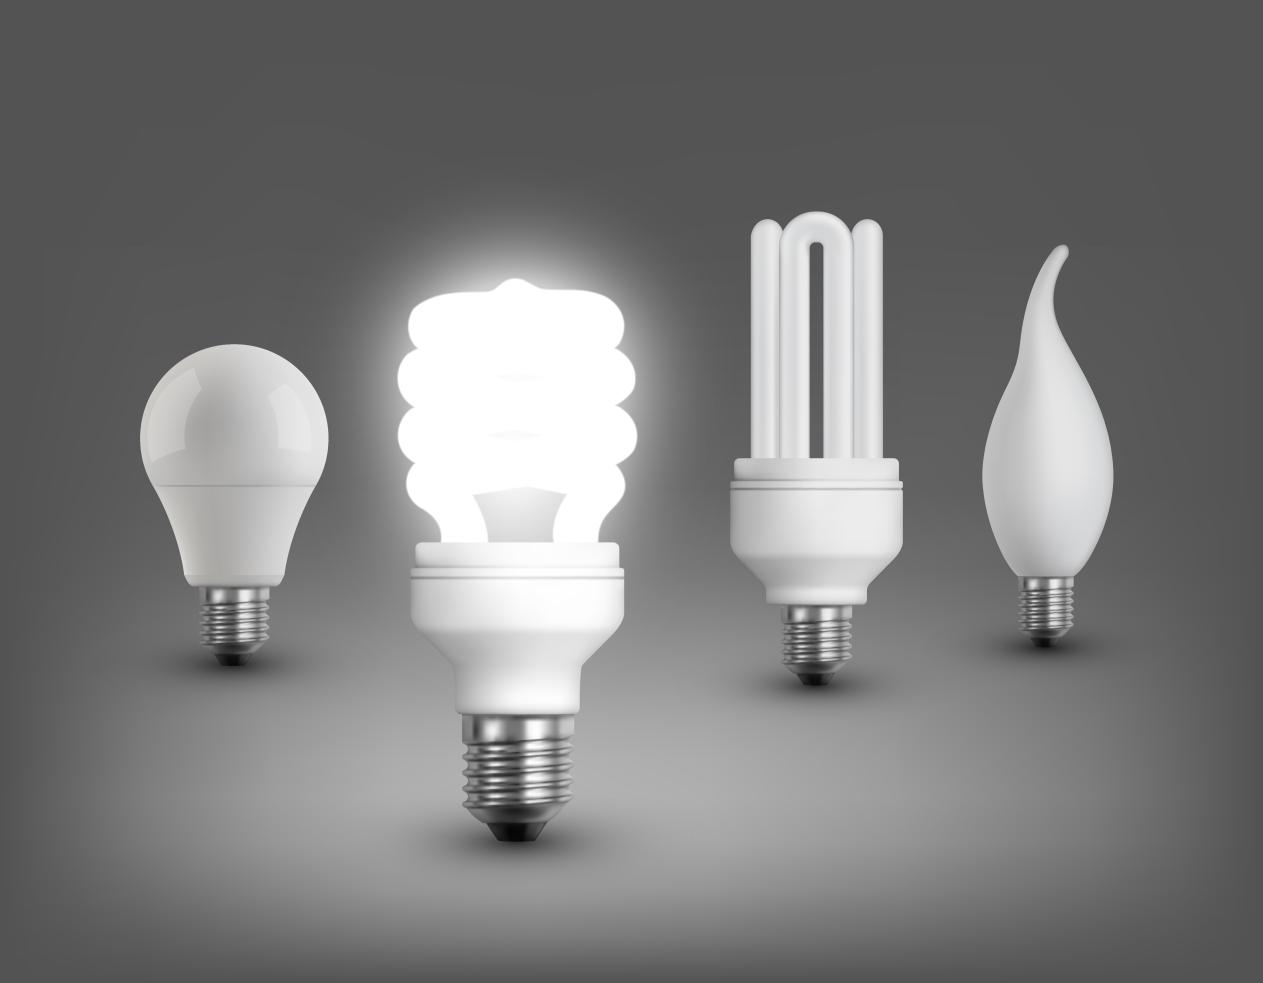 US to Implement Comprehensive Ban on Incandescent Light Bulbs